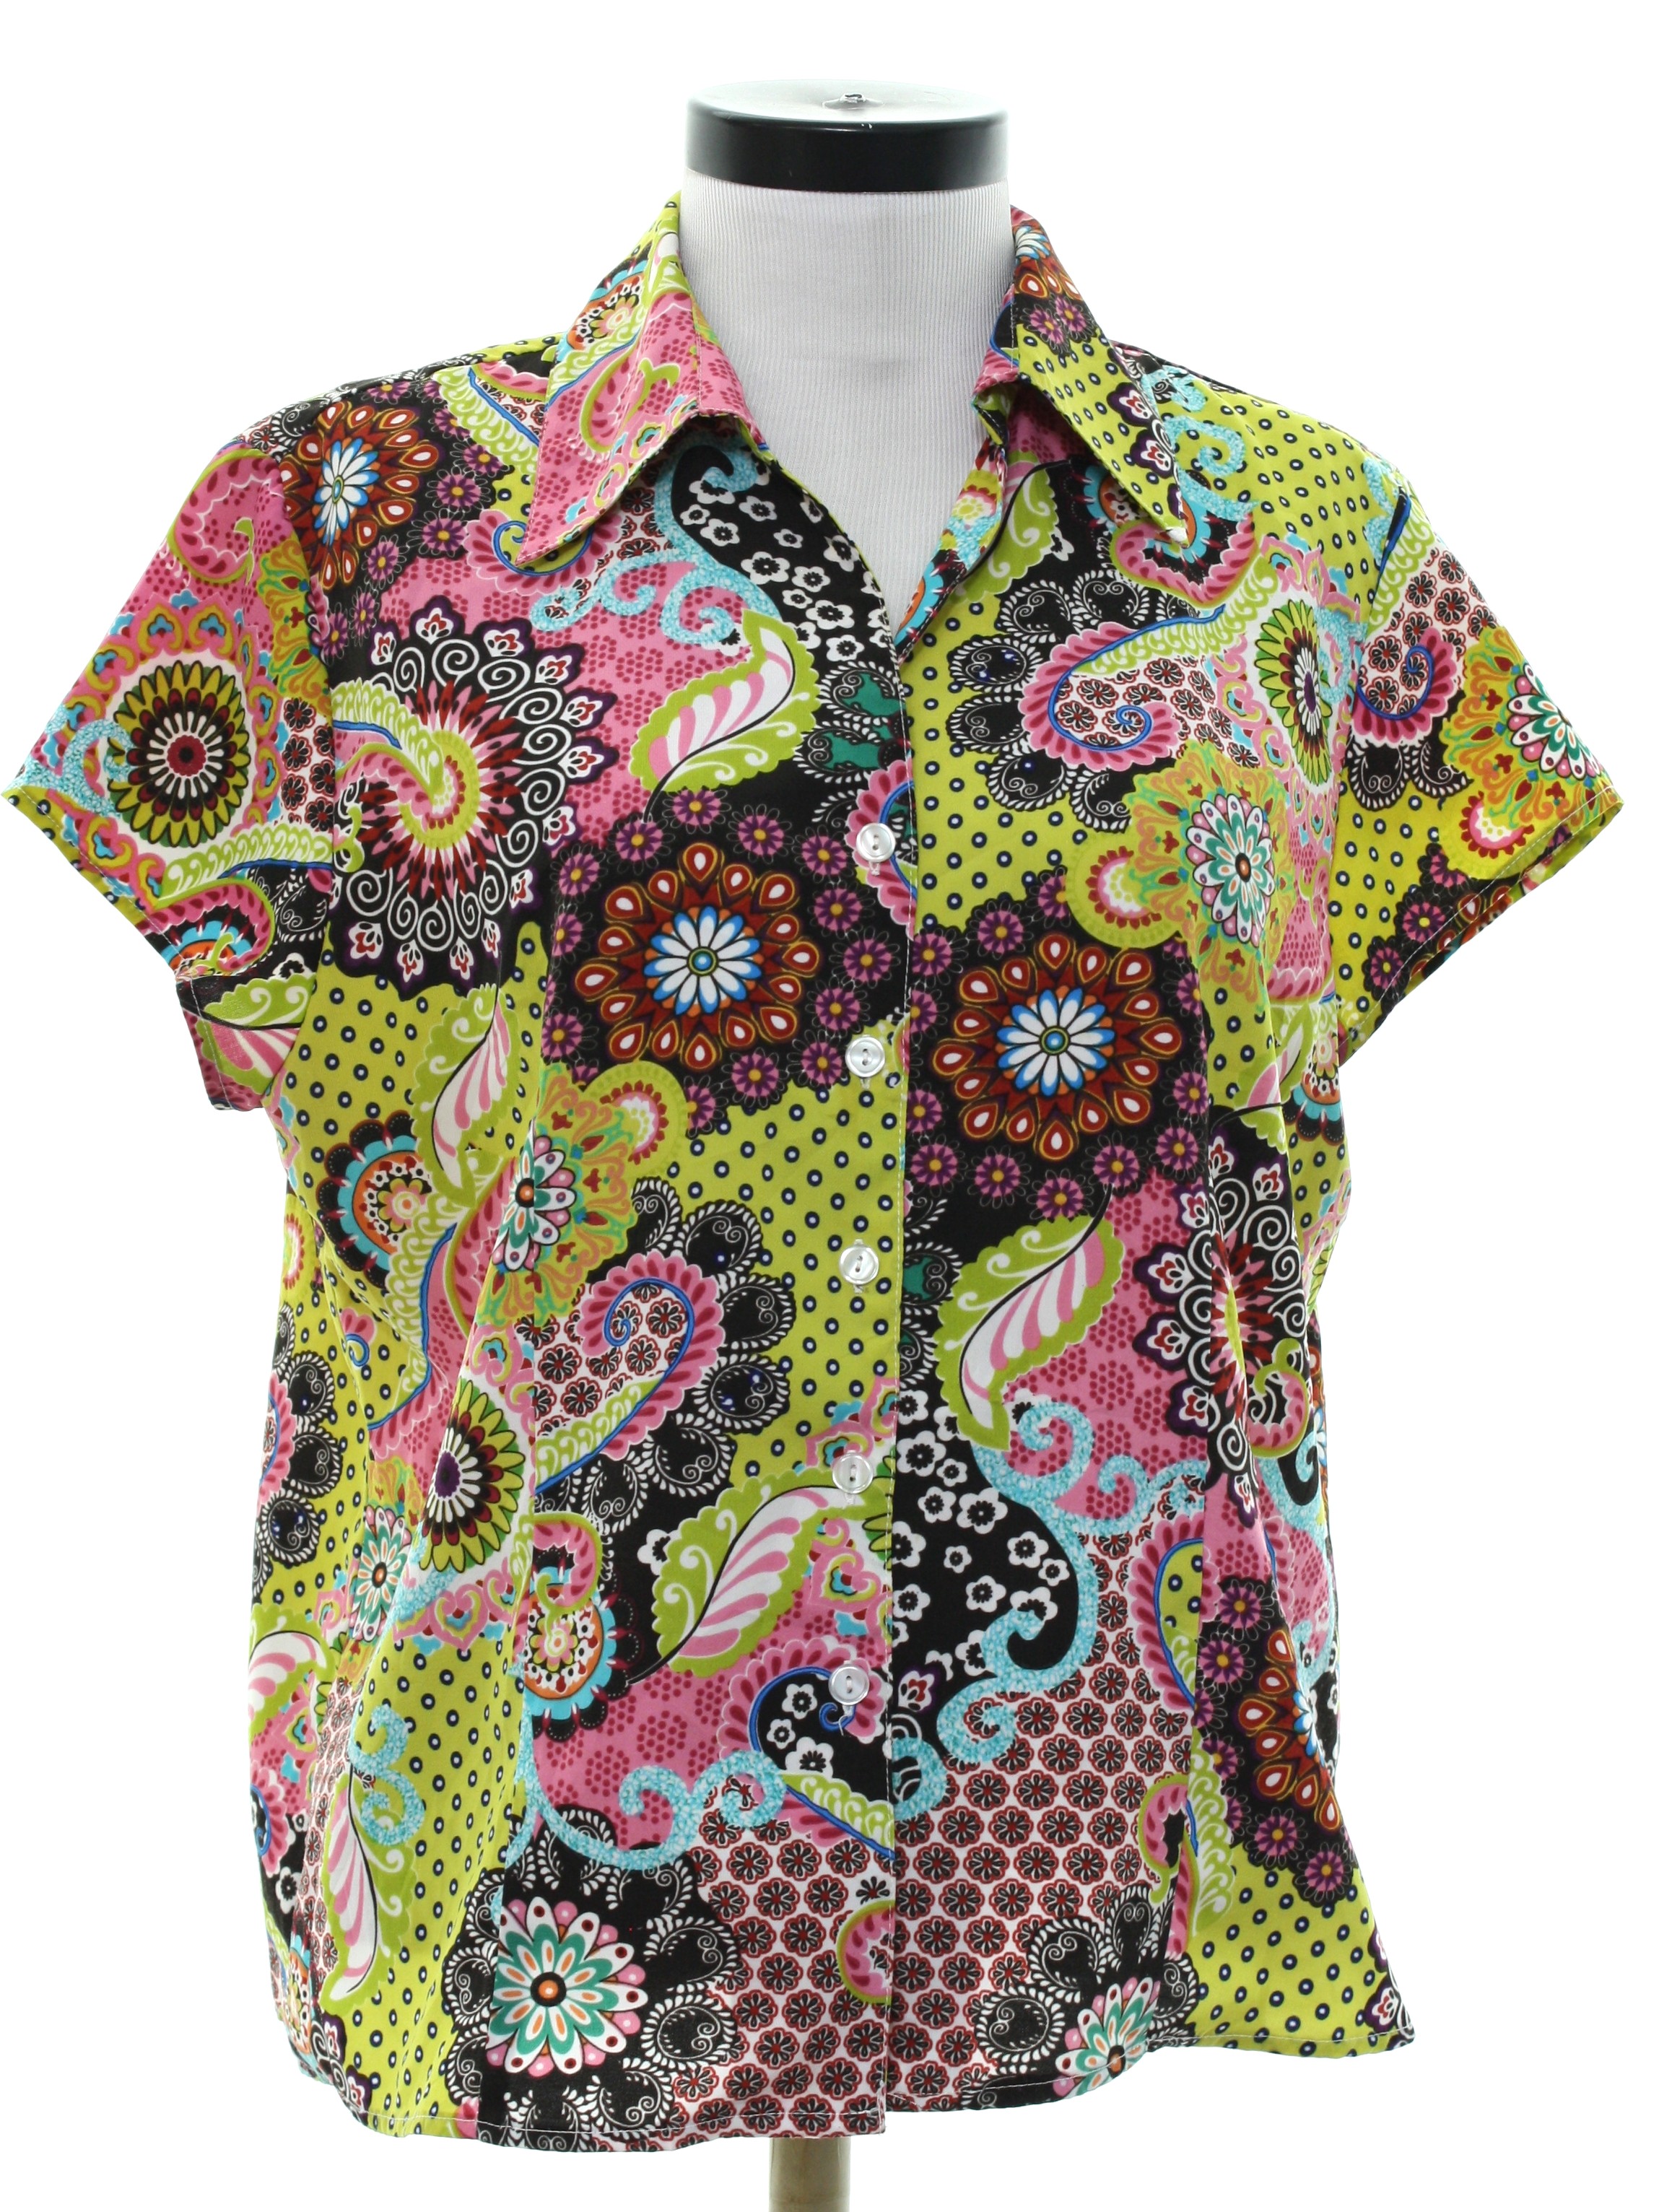 Retro 1970's Hippie Shirt (Apparenza) : 70s style (made in late 80s or ...